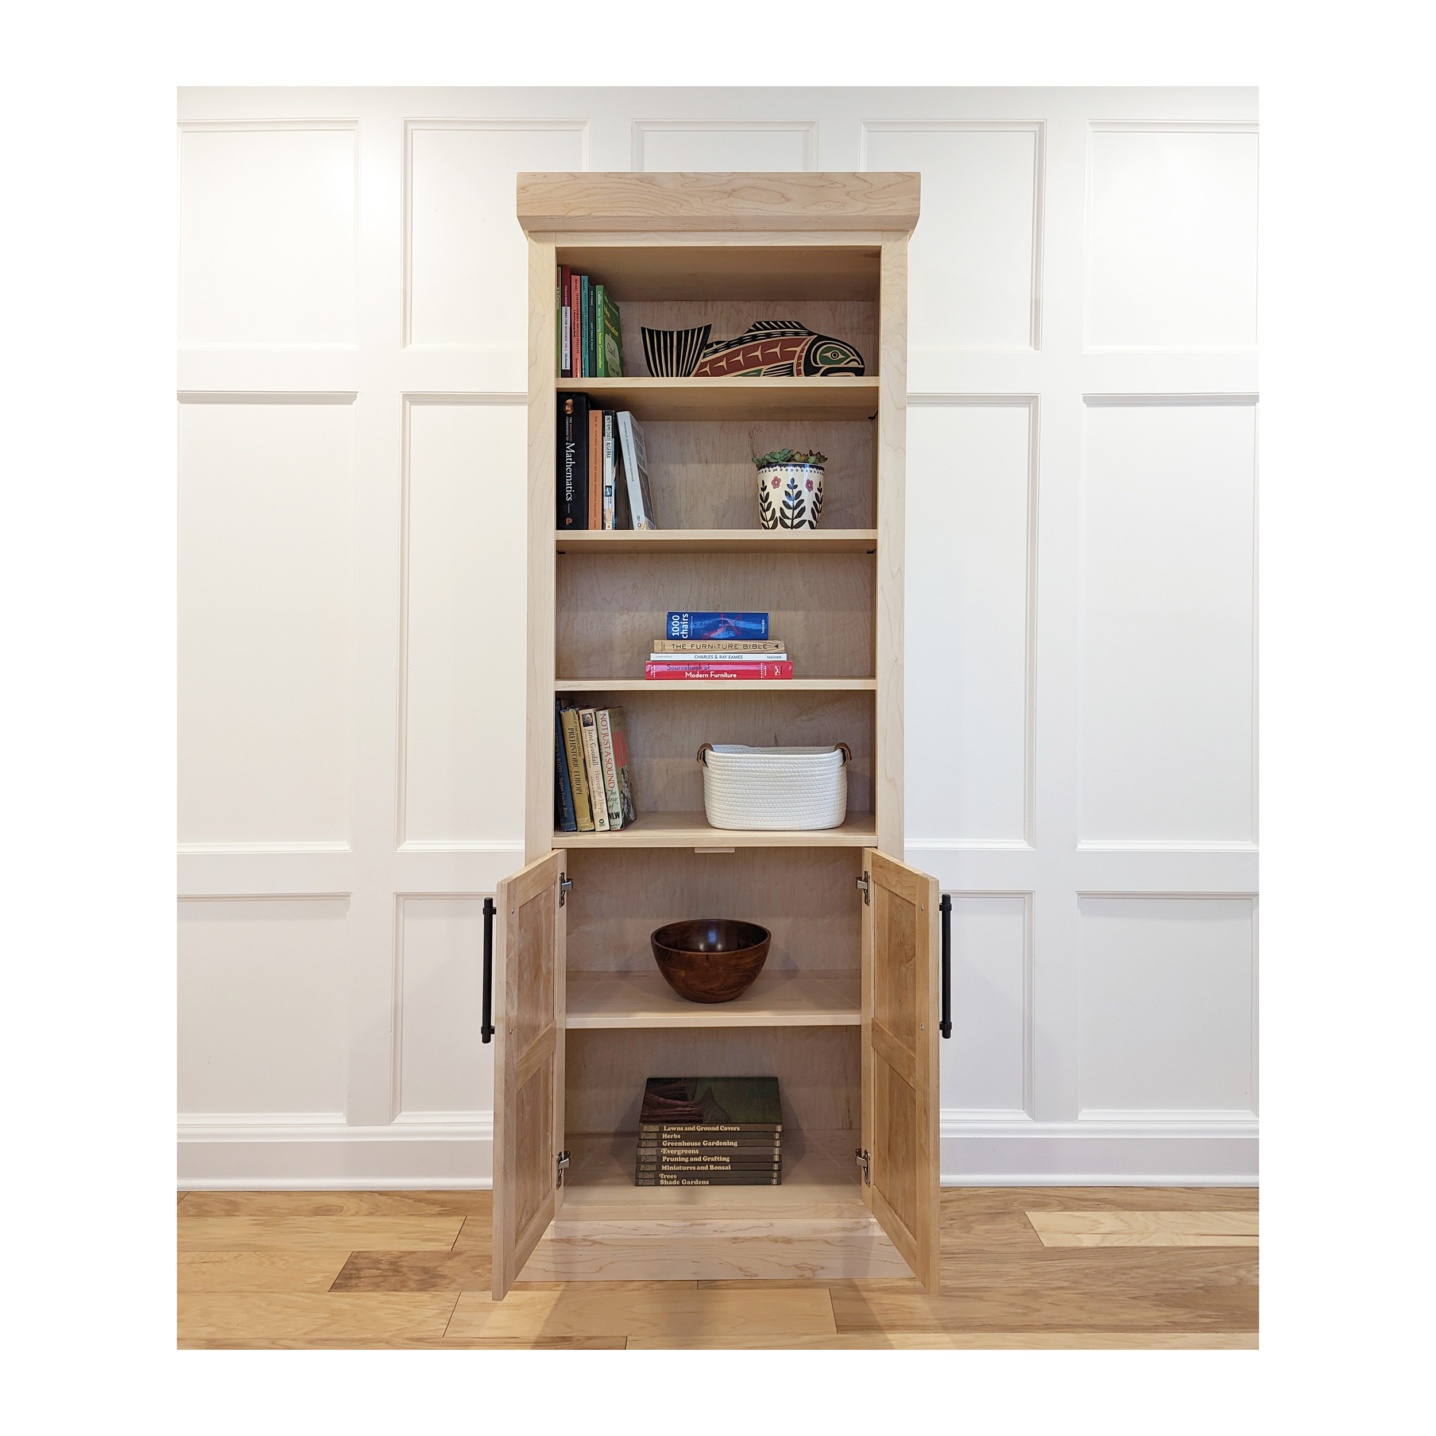 Maple wood bookcase with lower doors